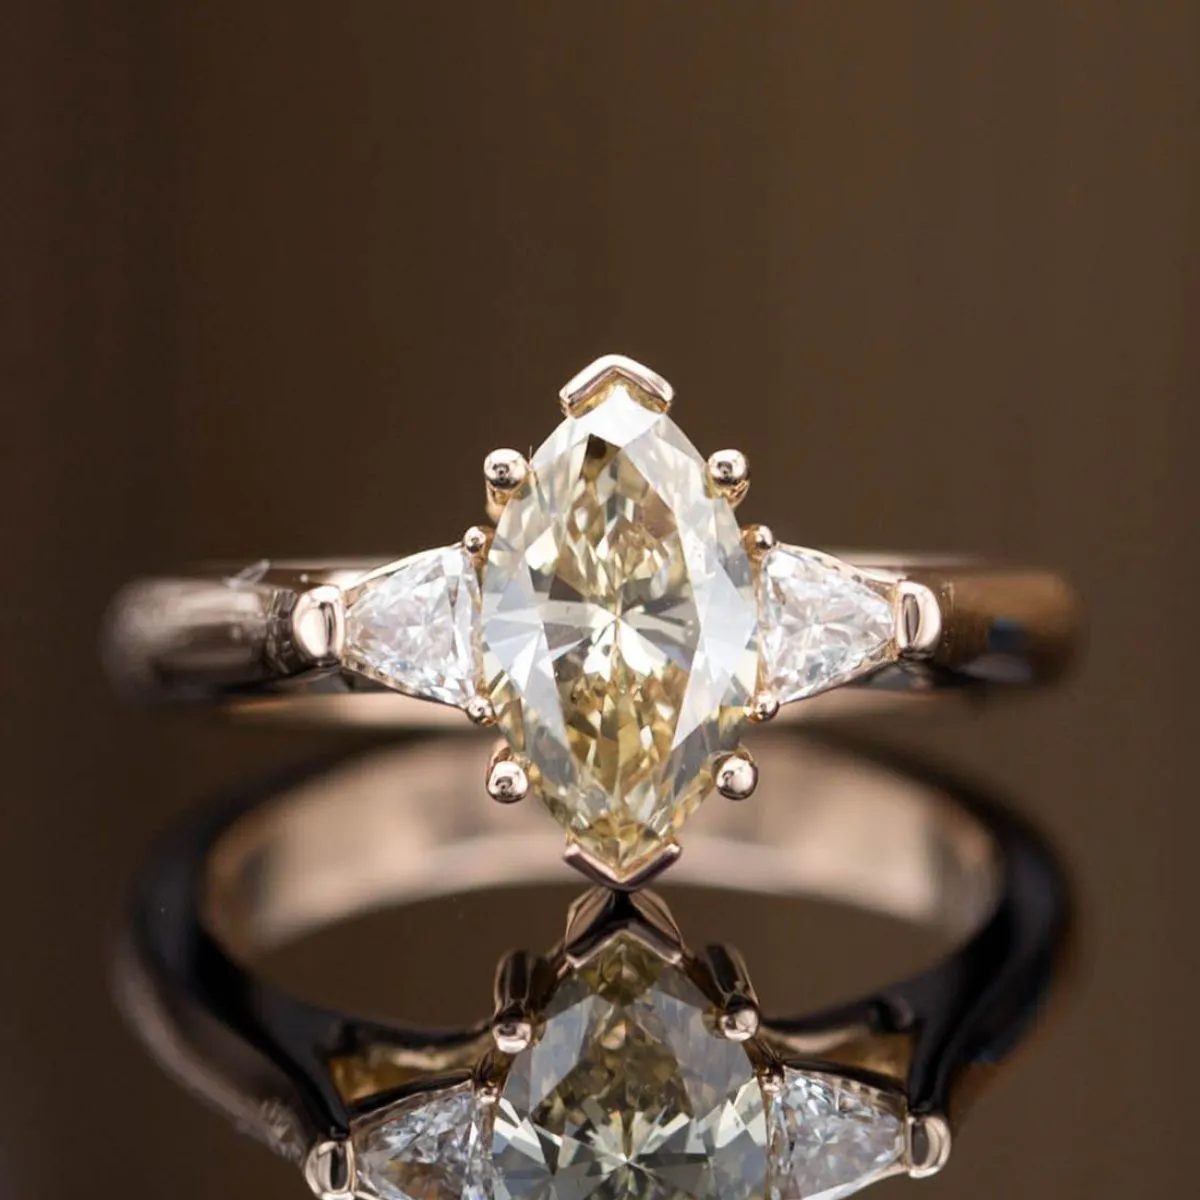 Champagne and Brown Diamond Buying Guide – Natural Diamonds with a Hint of Warmth